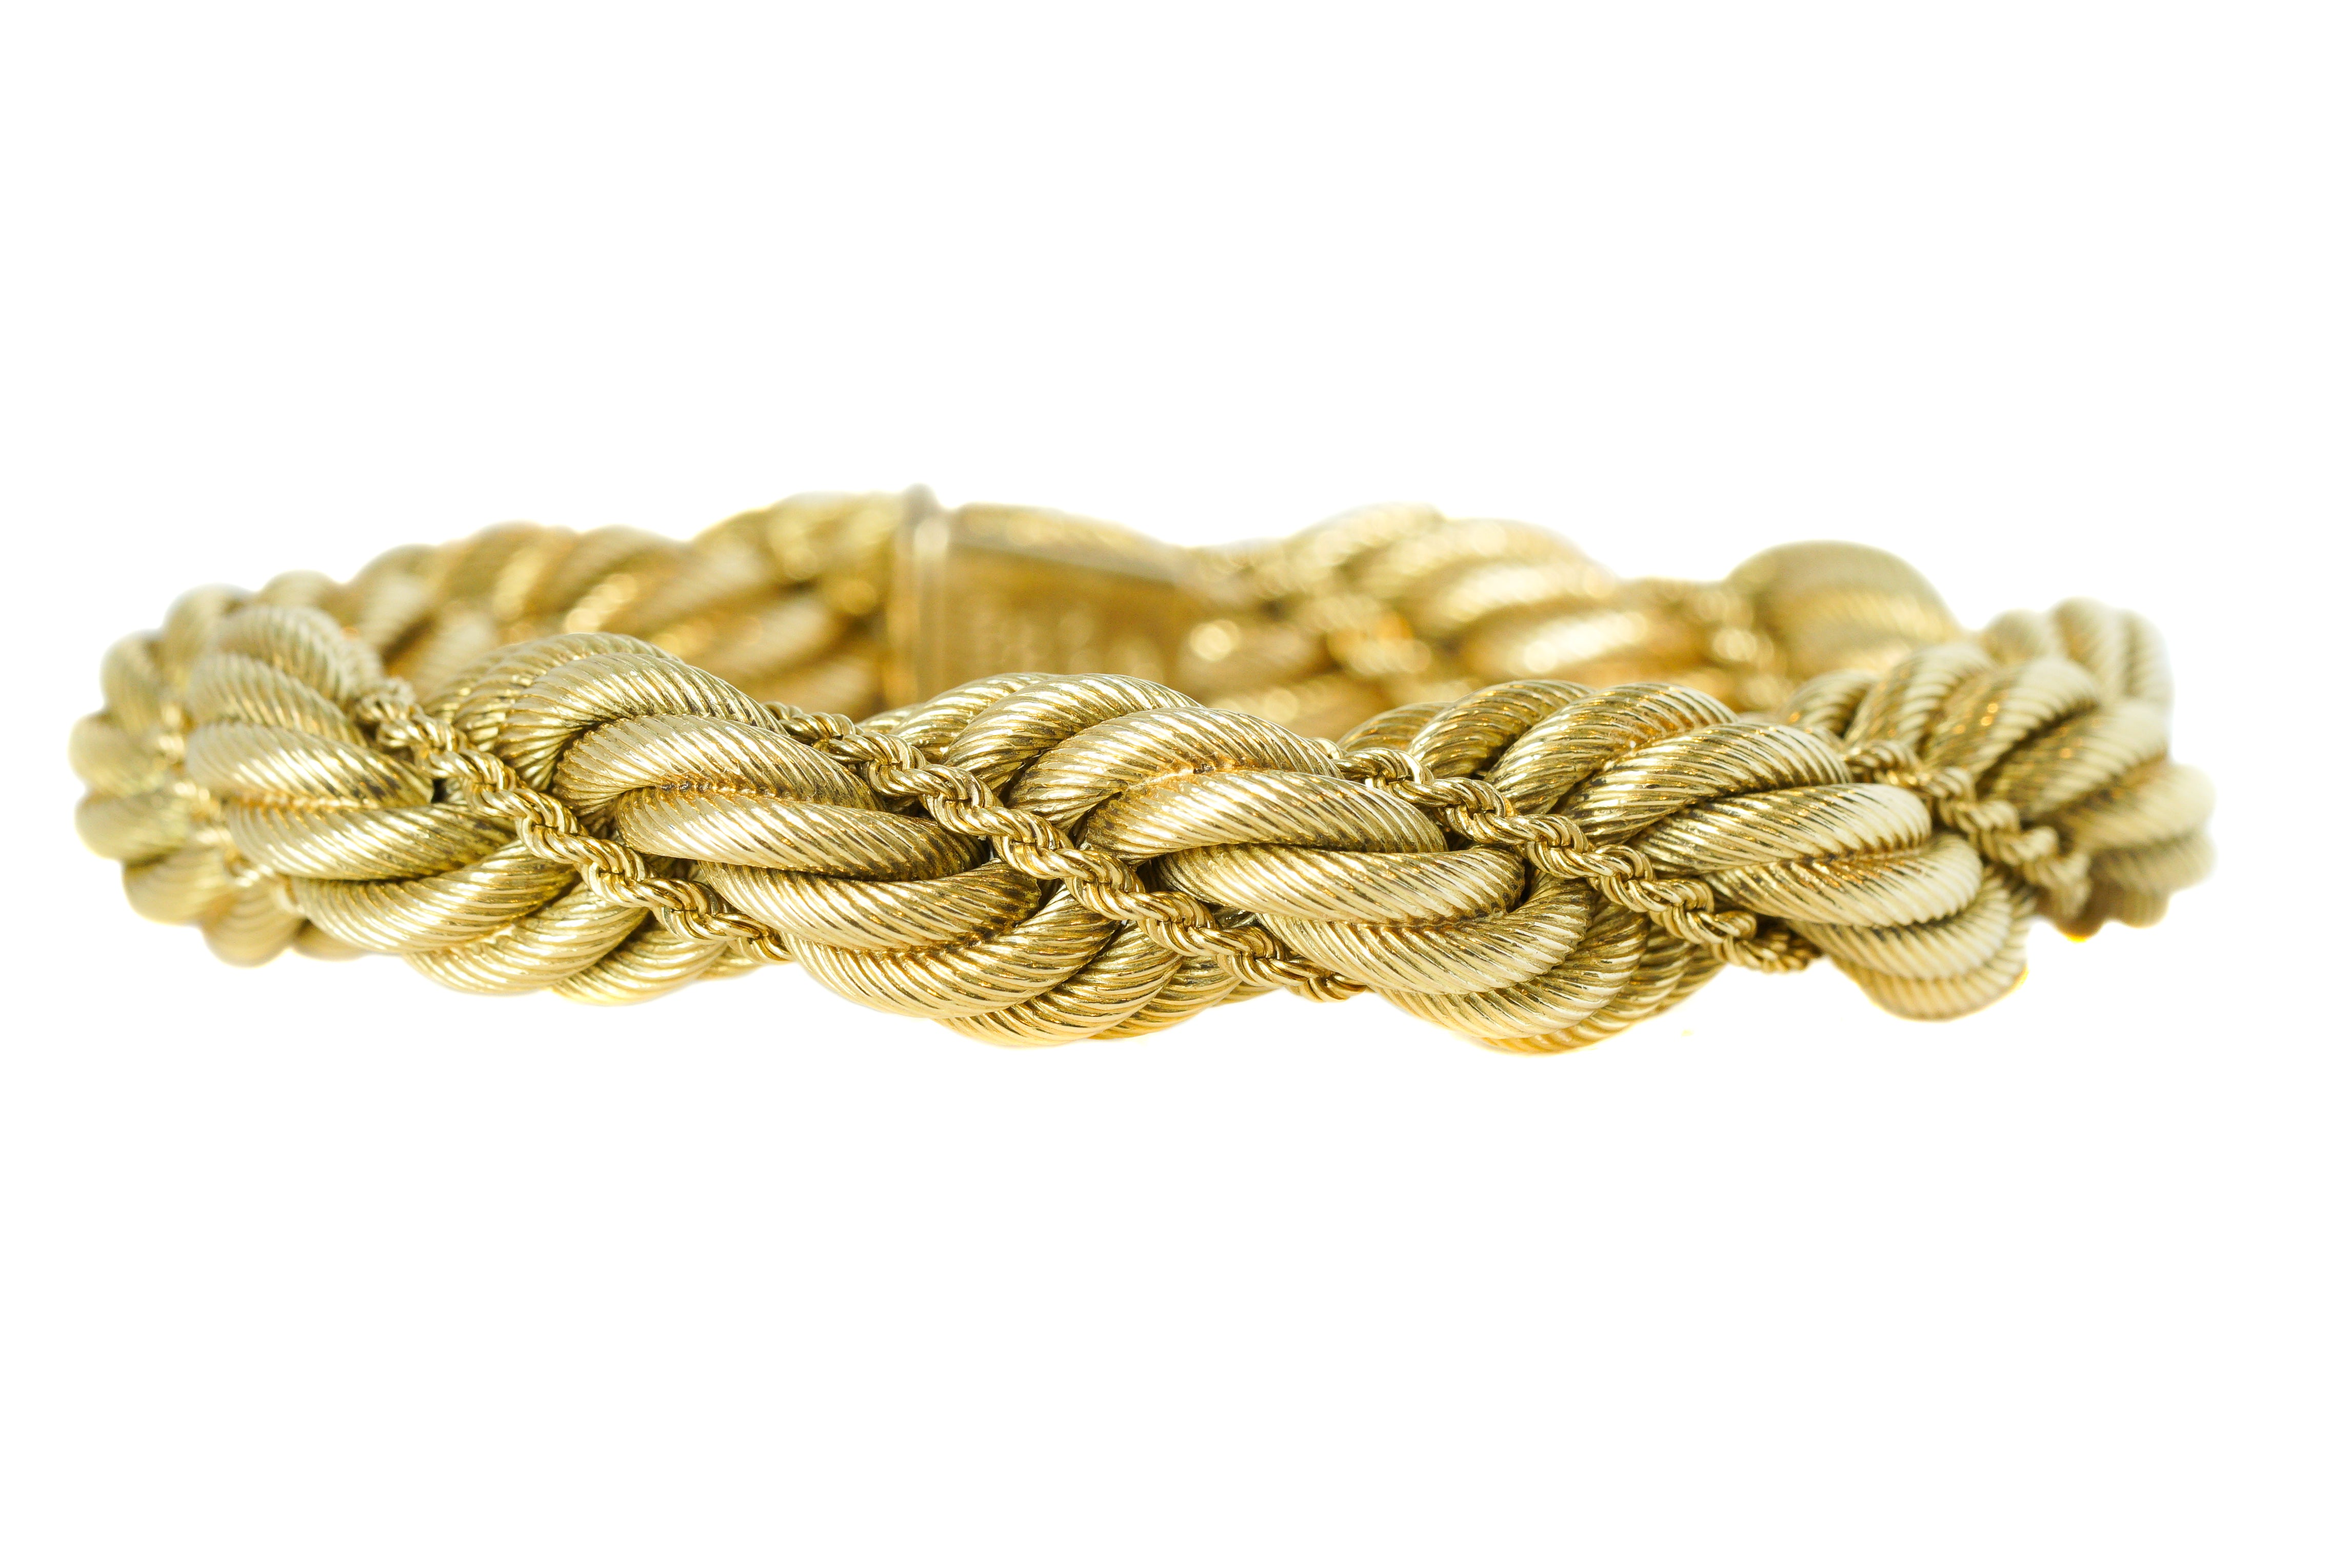 Tiffany and Co. 18k Gold Twisted Rope Bracelet – The Verma Group